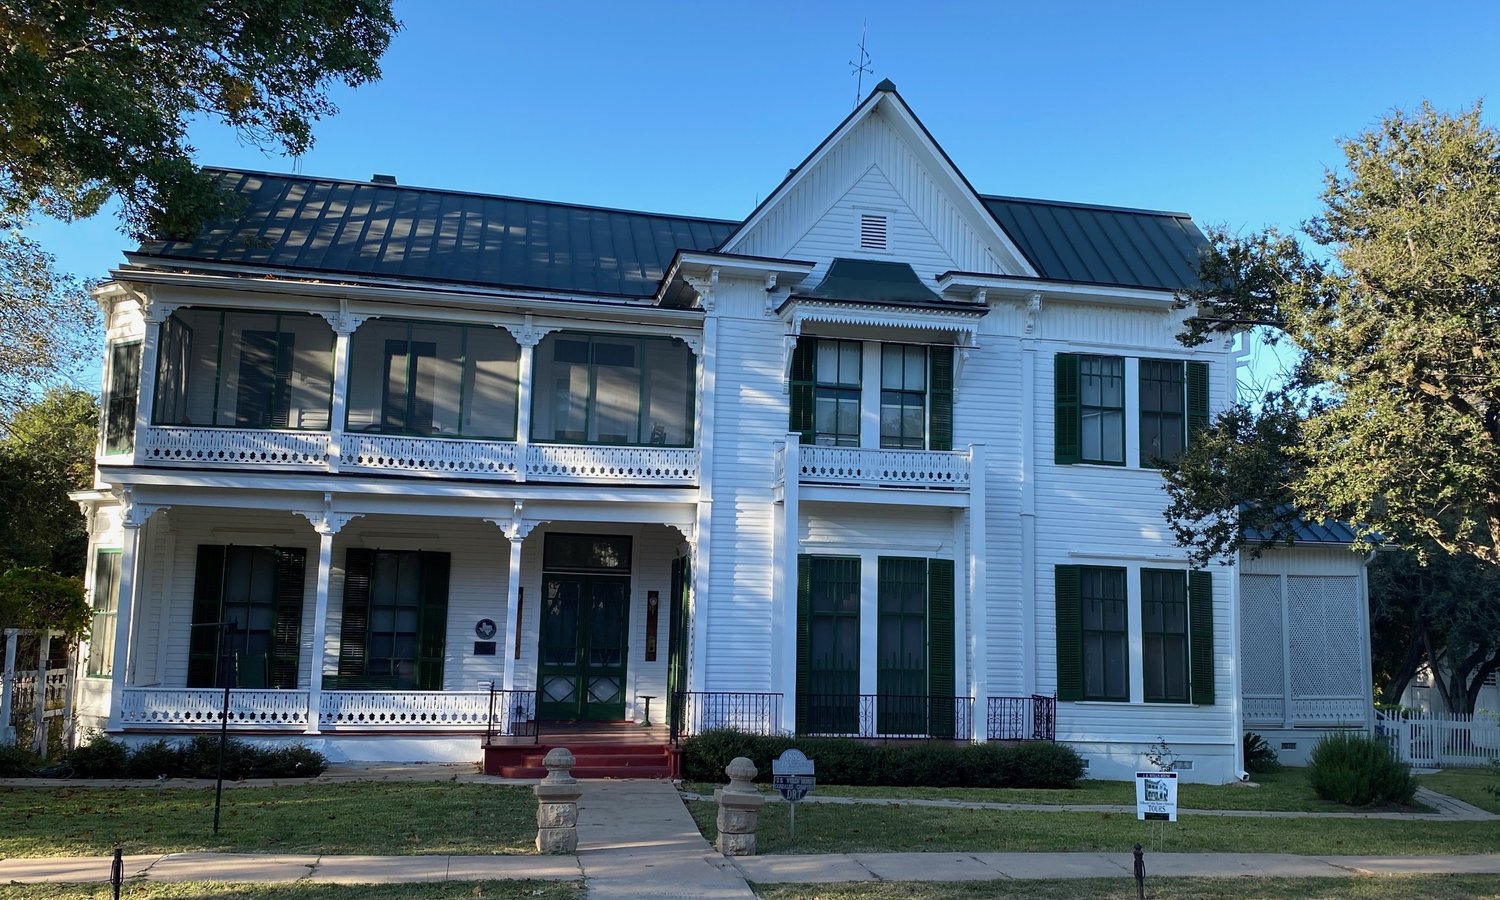 The JB Wells House is one of six historic homes that will be available to tour during the Winterfest Historic Homes Tour.